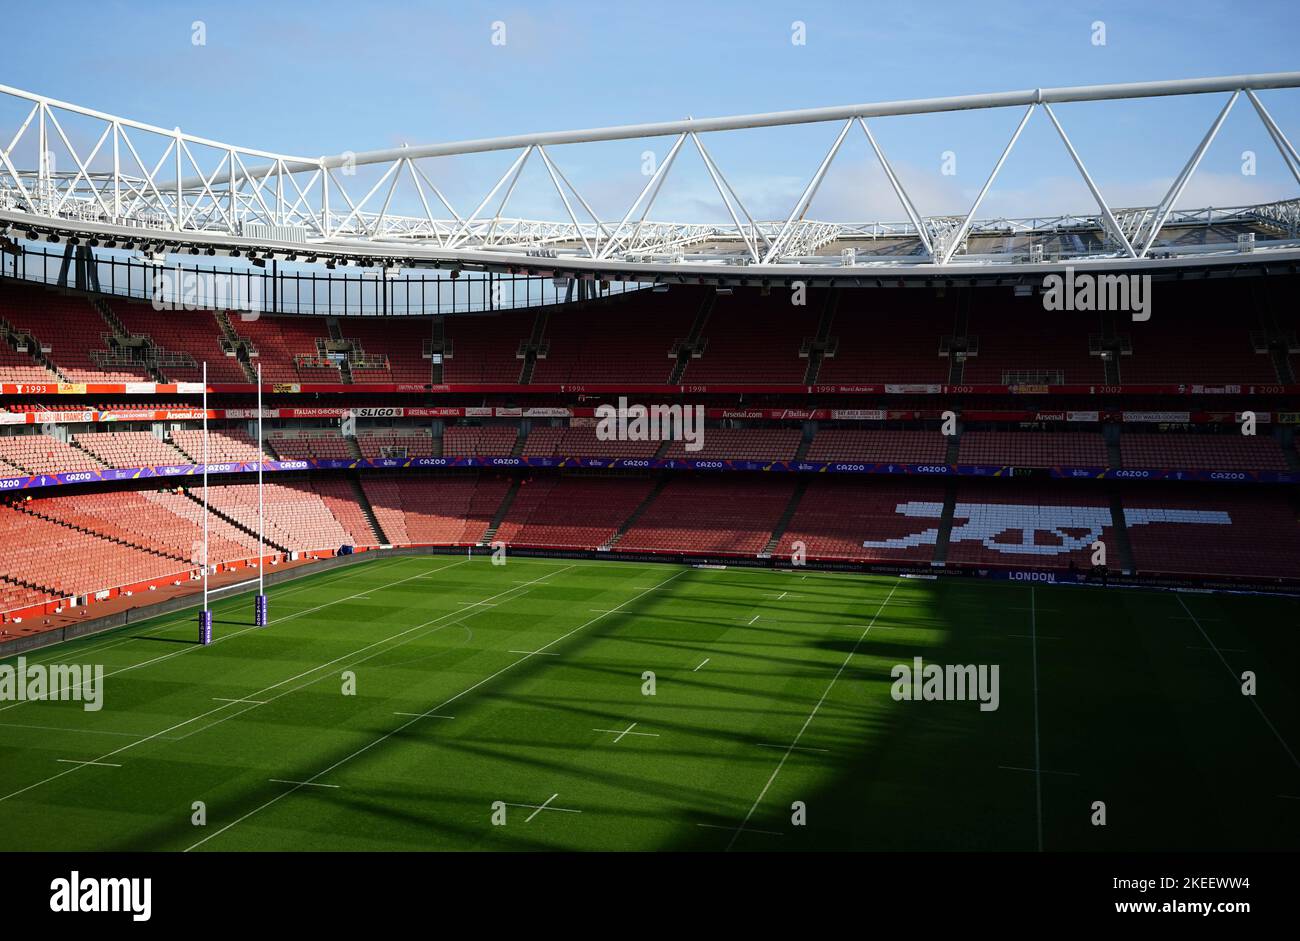 A general view of the Emirates Stadium, London (home of Arsenal) ahead of the England v Samoa, Rugby League World Cup semi-final match. Picture date: Saturday November 12, 2022. Stock Photo